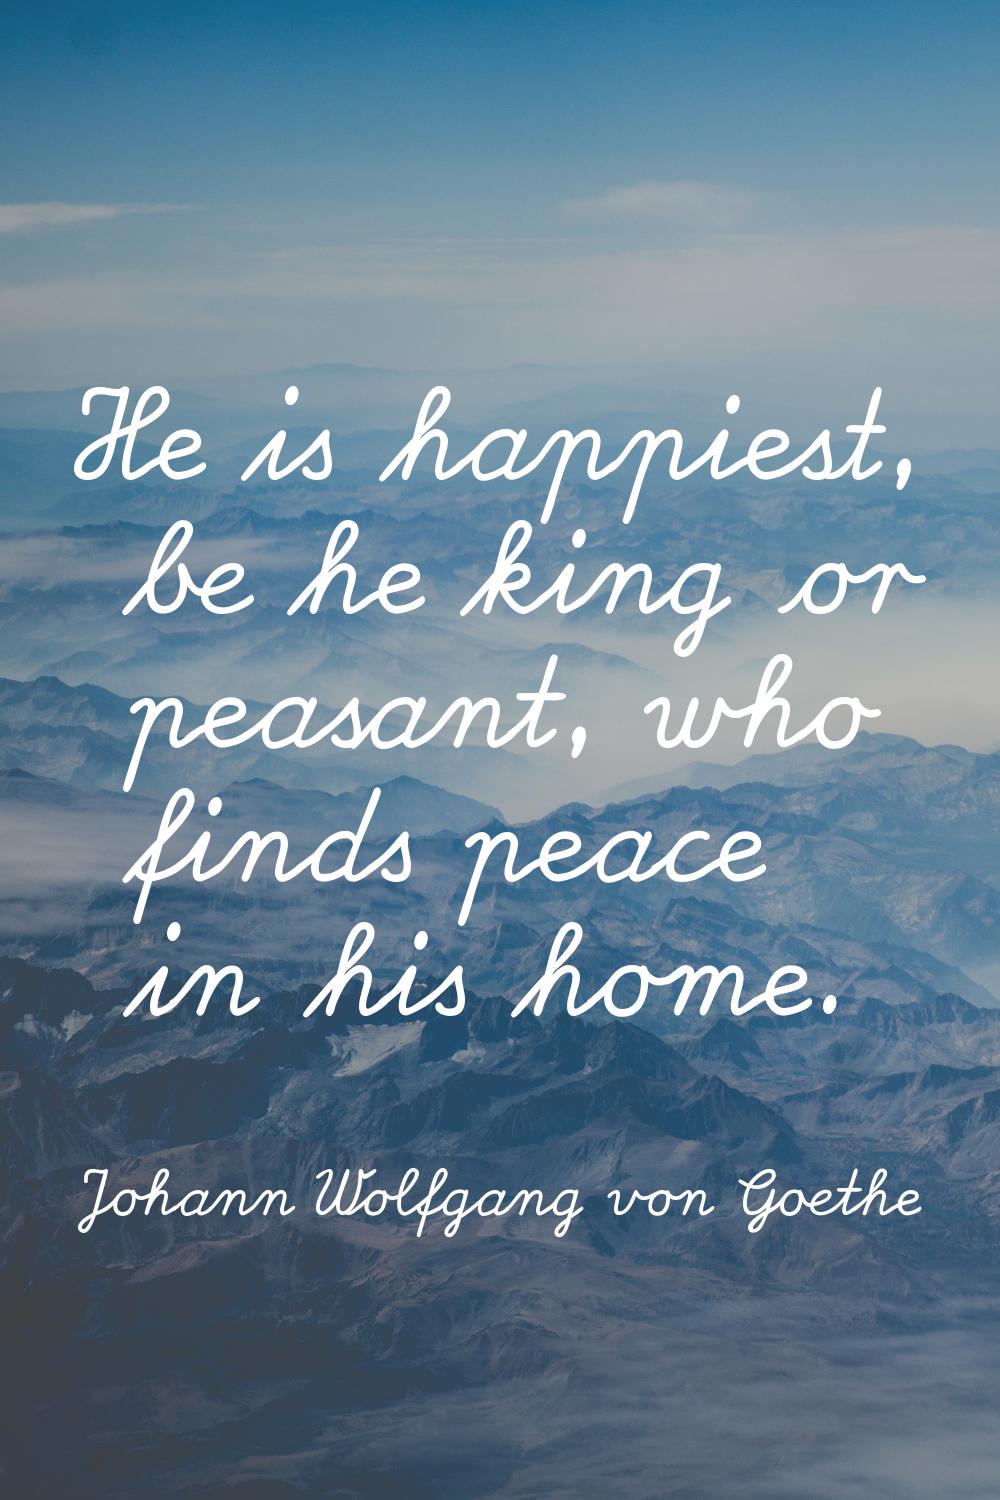 He is happiest, be he king or peasant, who finds peace in his home.